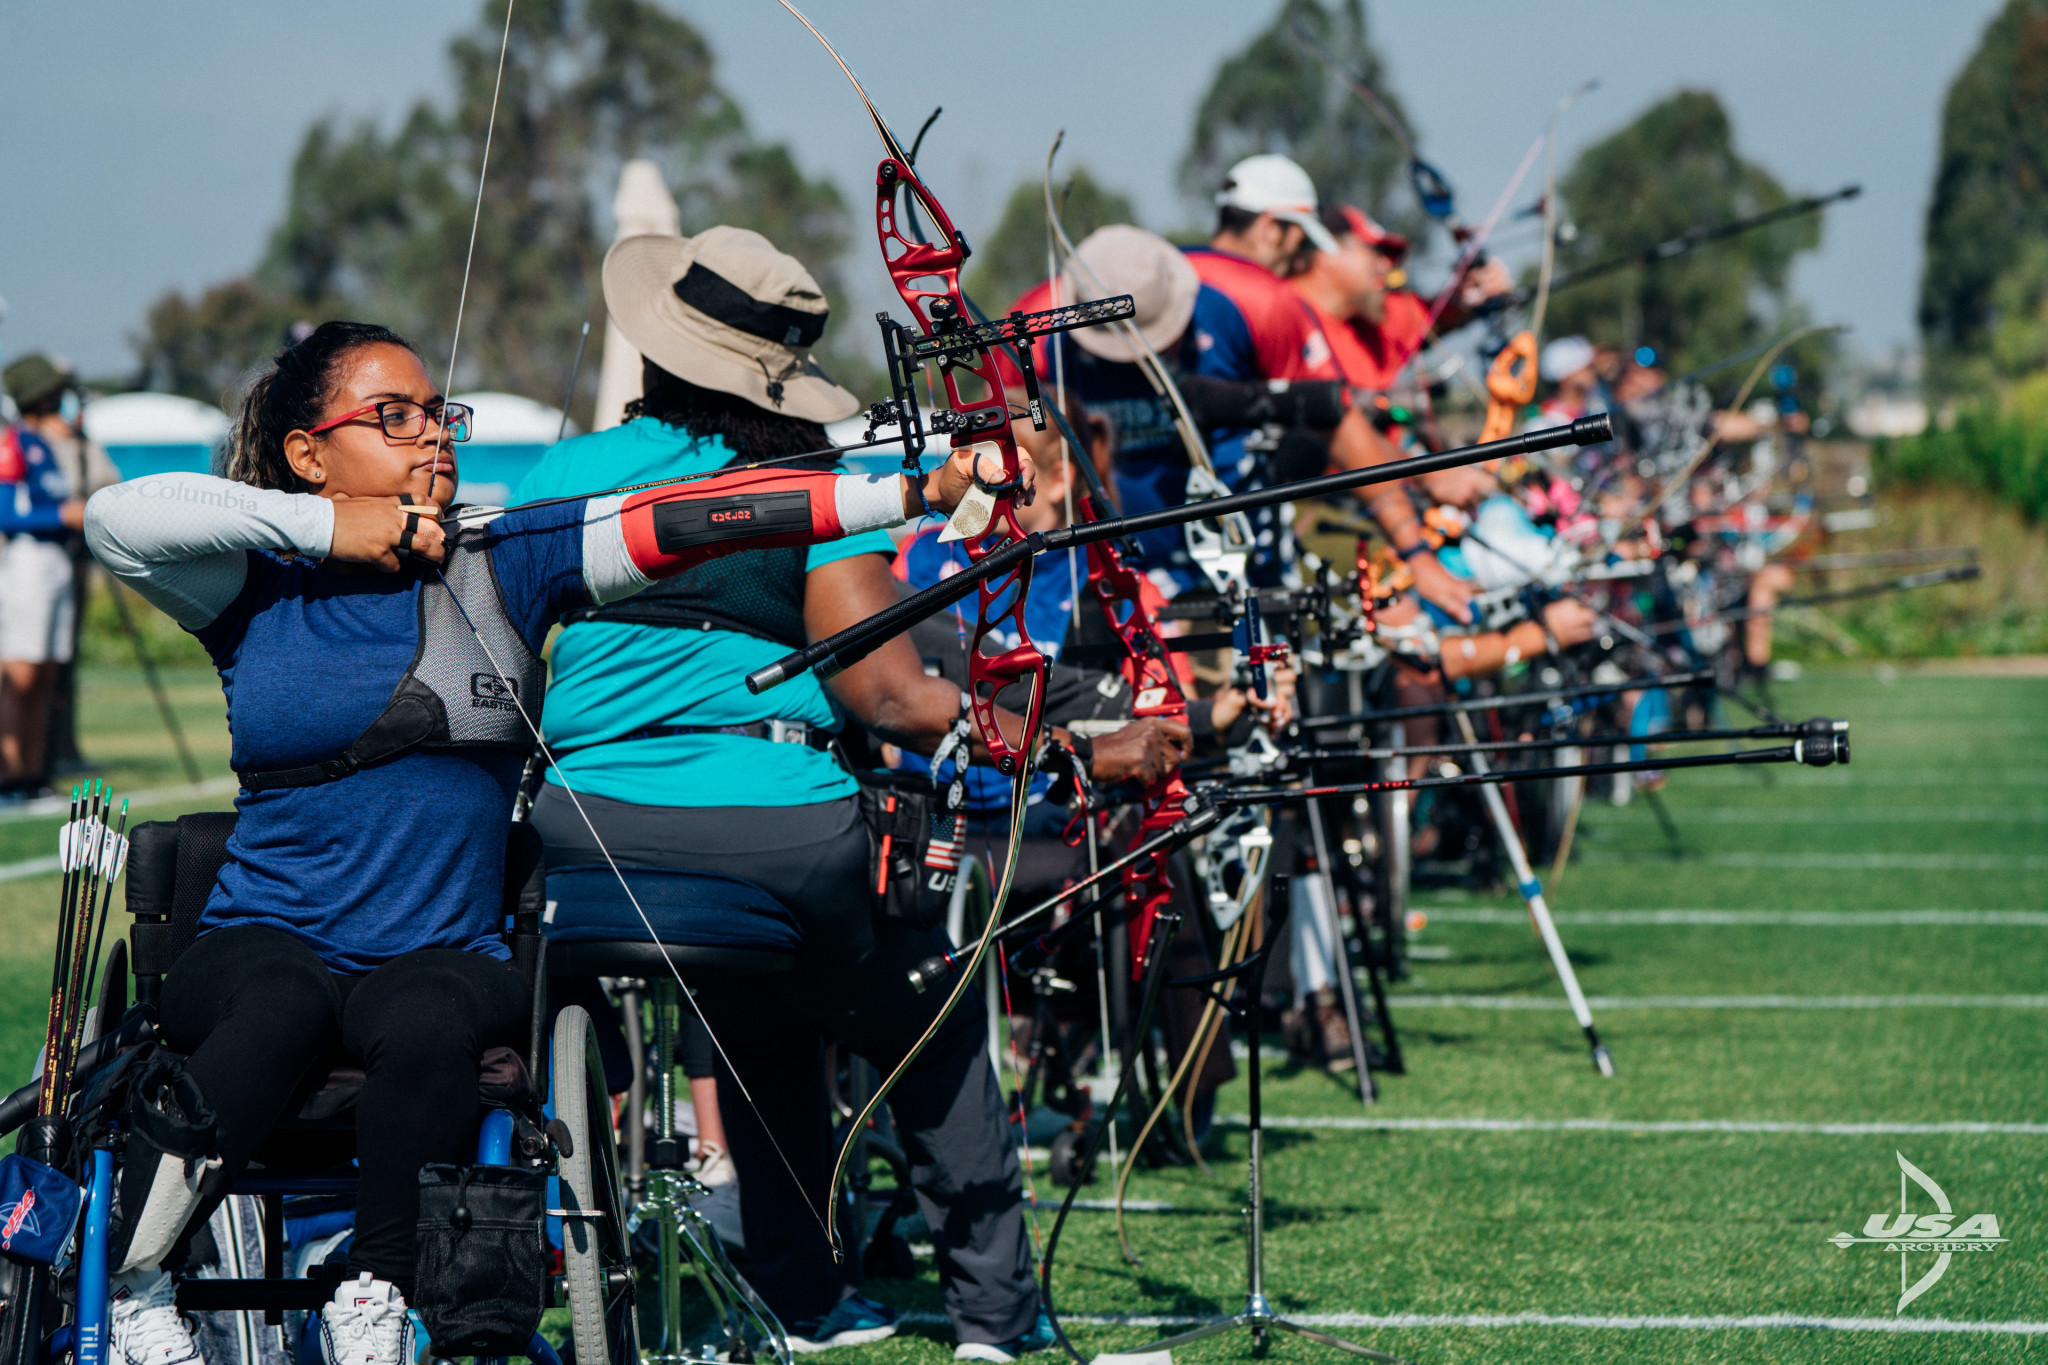 USA Archery collaborates with Move United to further Para archery development